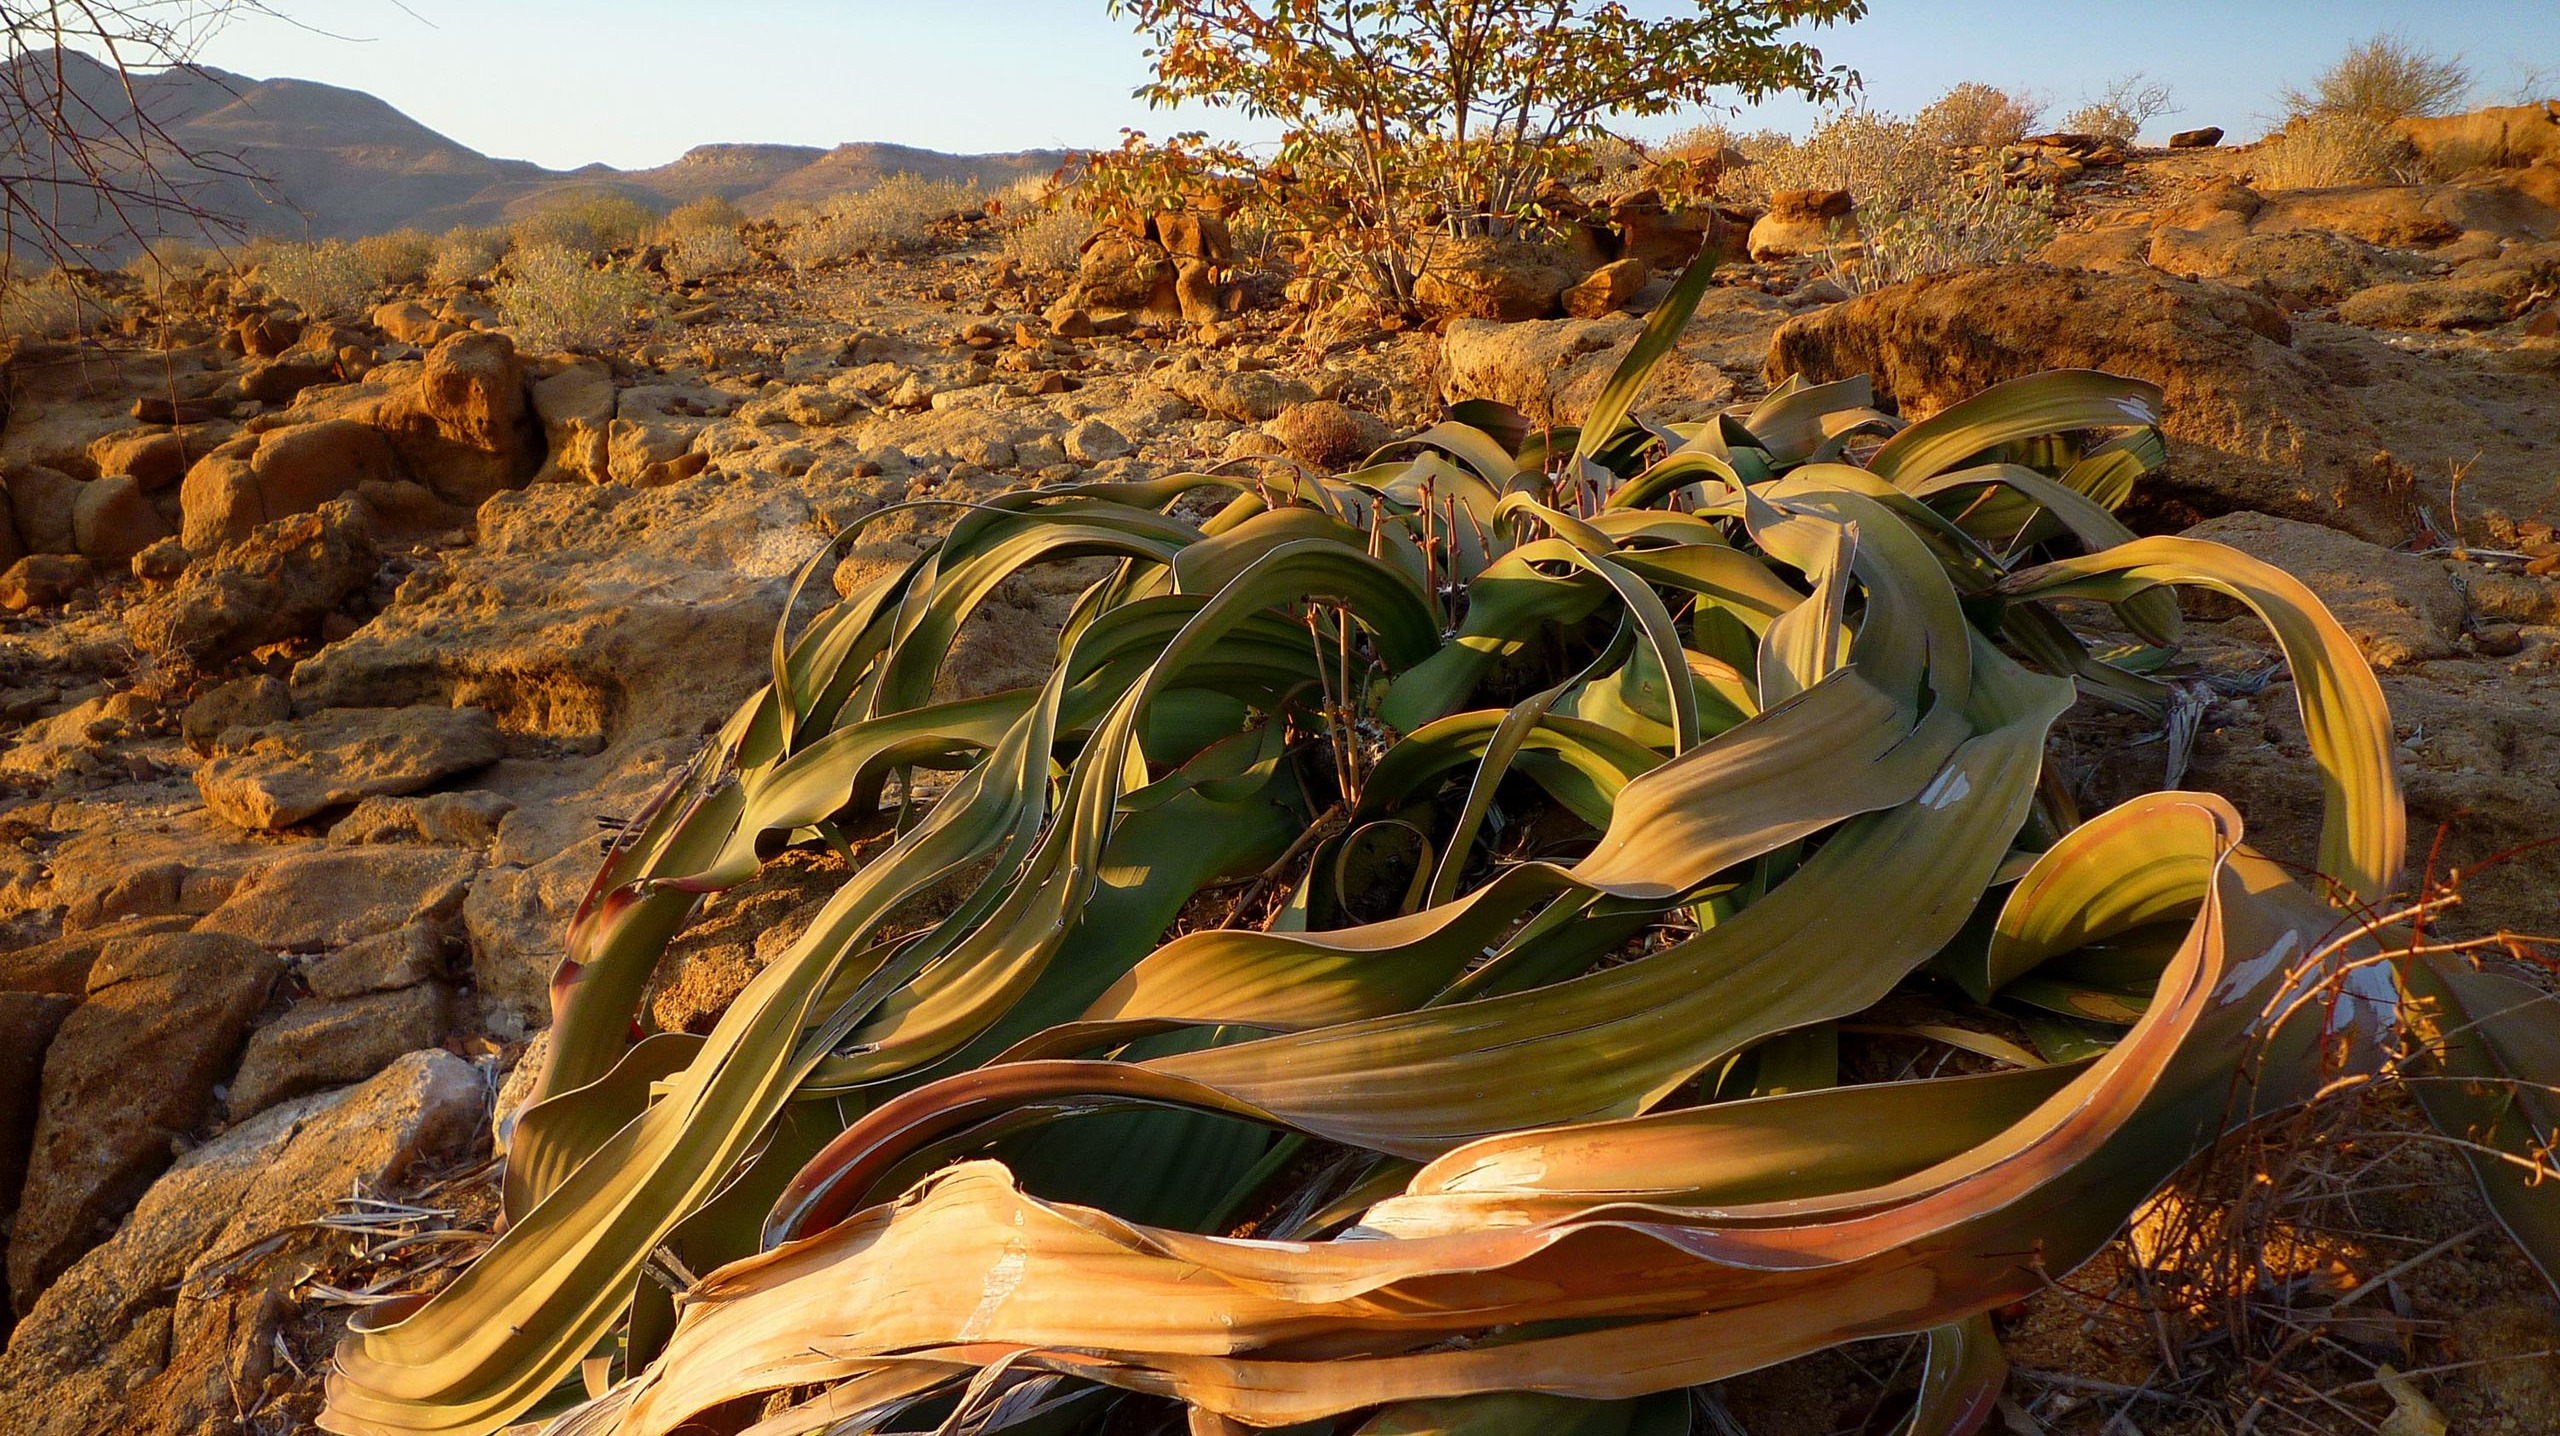 A plant made up of long dry leaves straggled along the ground, in a scrubby desert at dawn